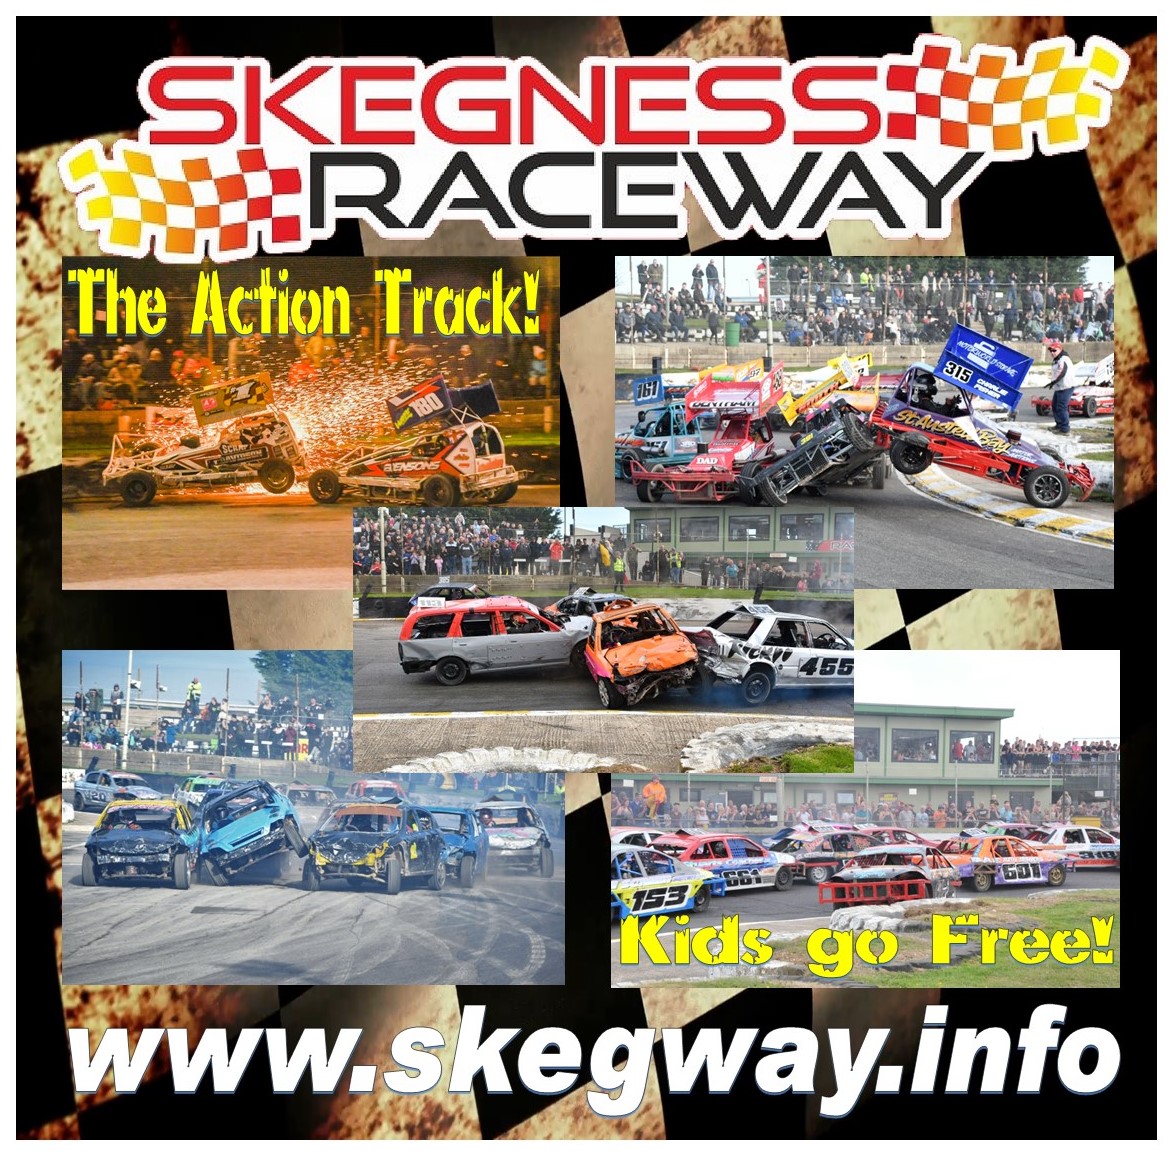 Skeg Vegas Action! Just visit skegway.info for full event guide Our next events are Sun 5th 1pm & Mon 6th May 1pm Stock Car & Banger Racing plus lots more! Advance Tickets on the website plus lots of info on the raceway Great Family Entertainment Kids Go Free